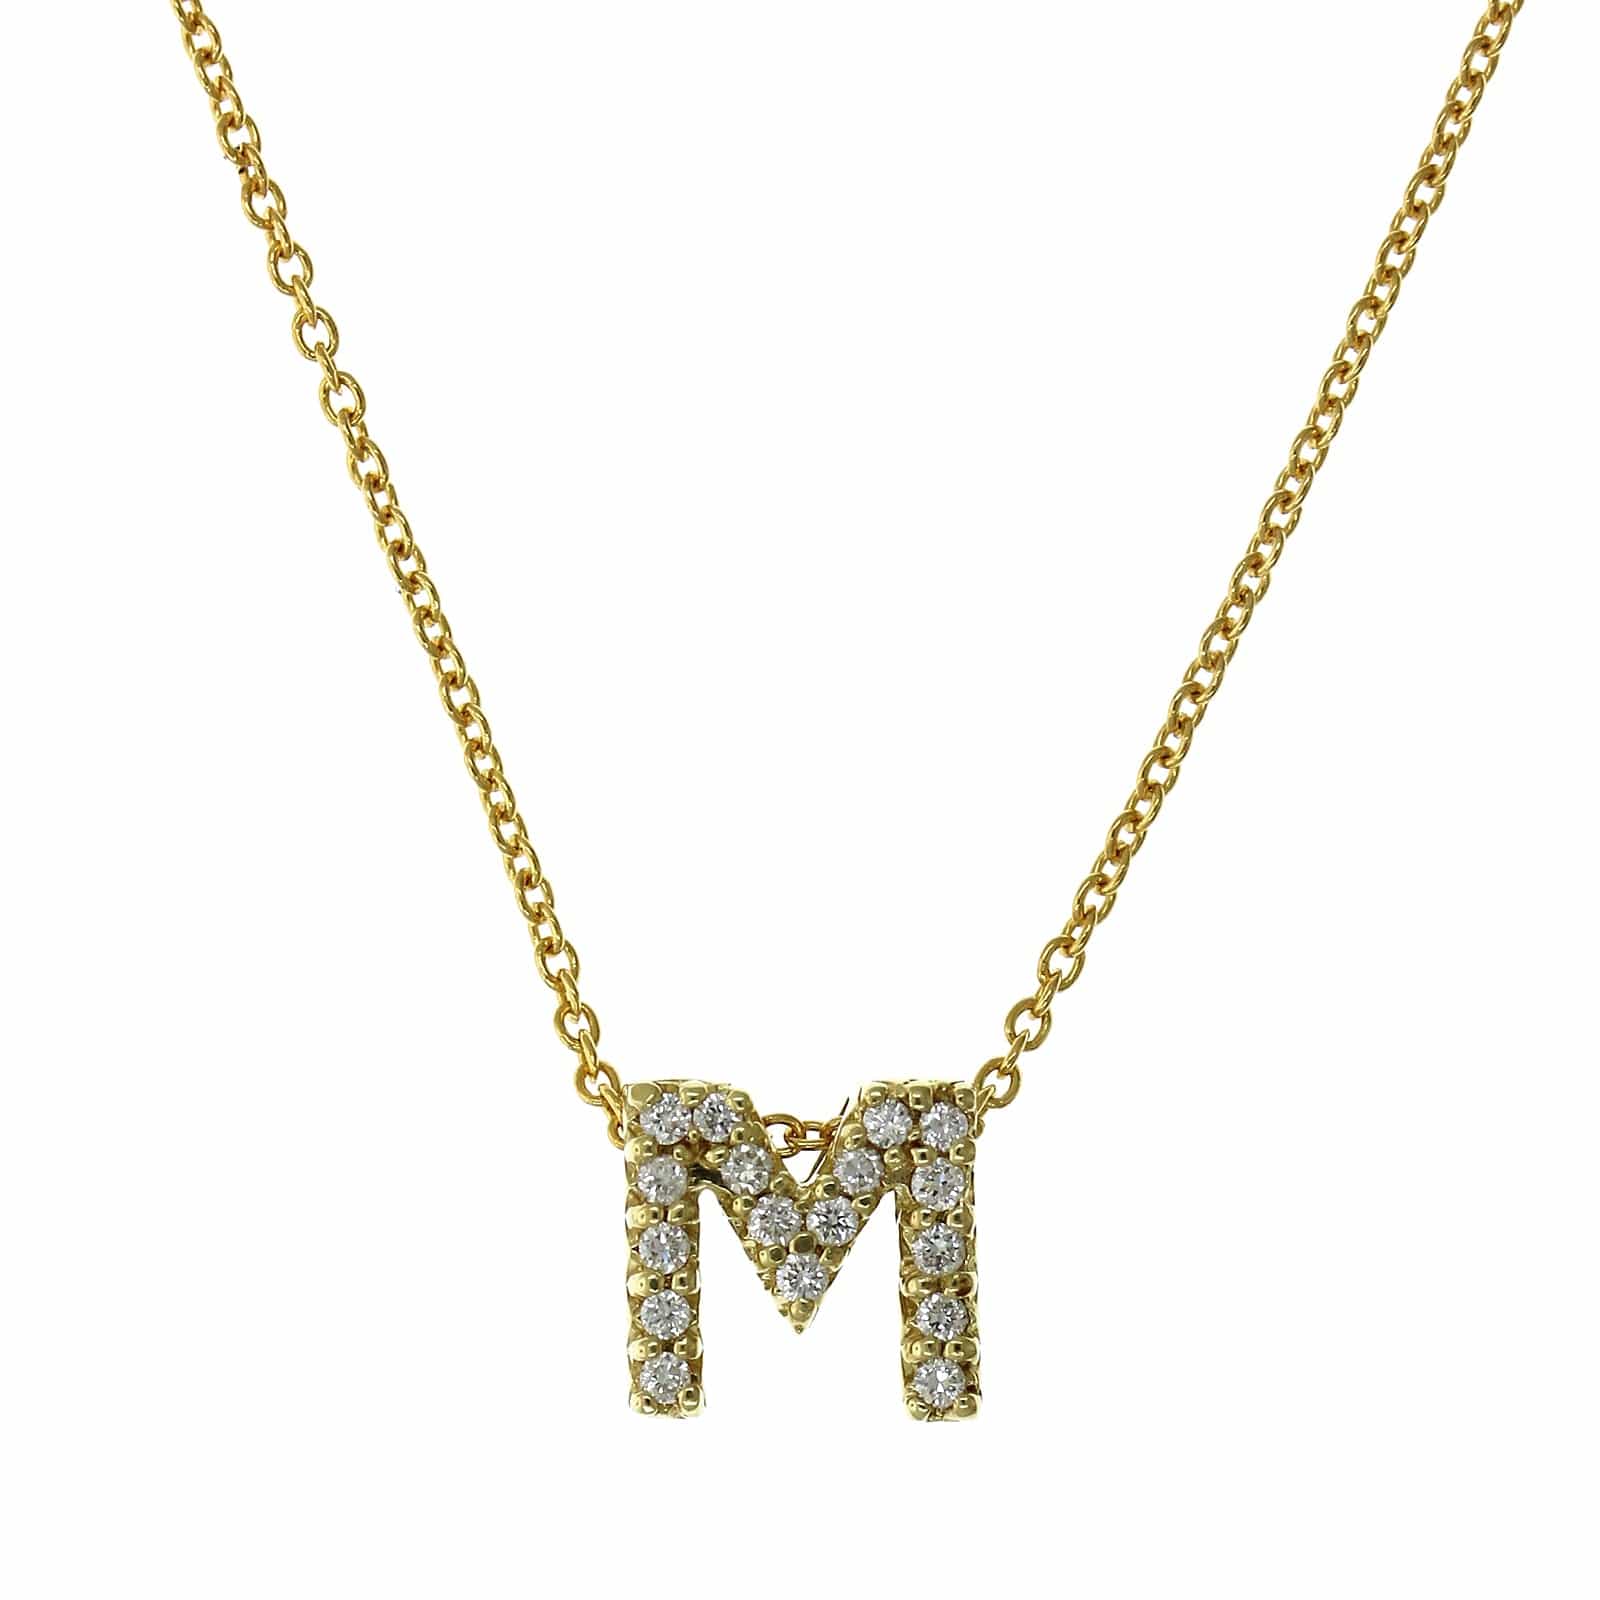 Roberto Coin 18K Yellow Gold "M" Initial Diamond Necklace